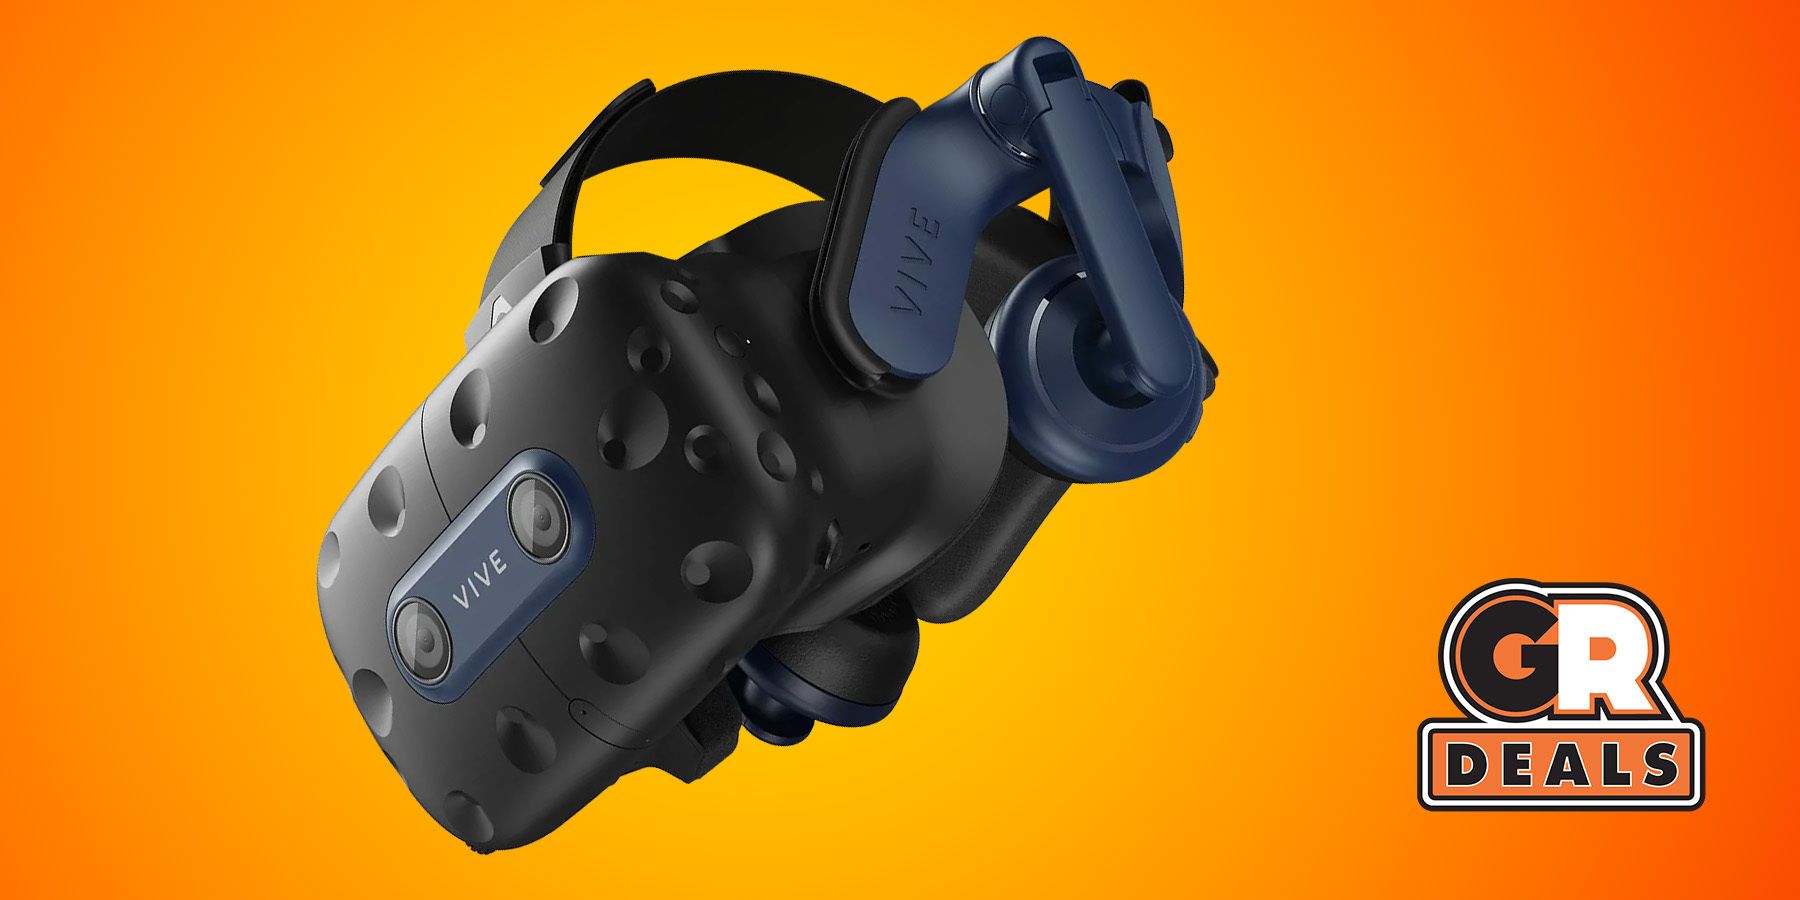 HTC Vive Pro 2 review: Jaw-droppingly good